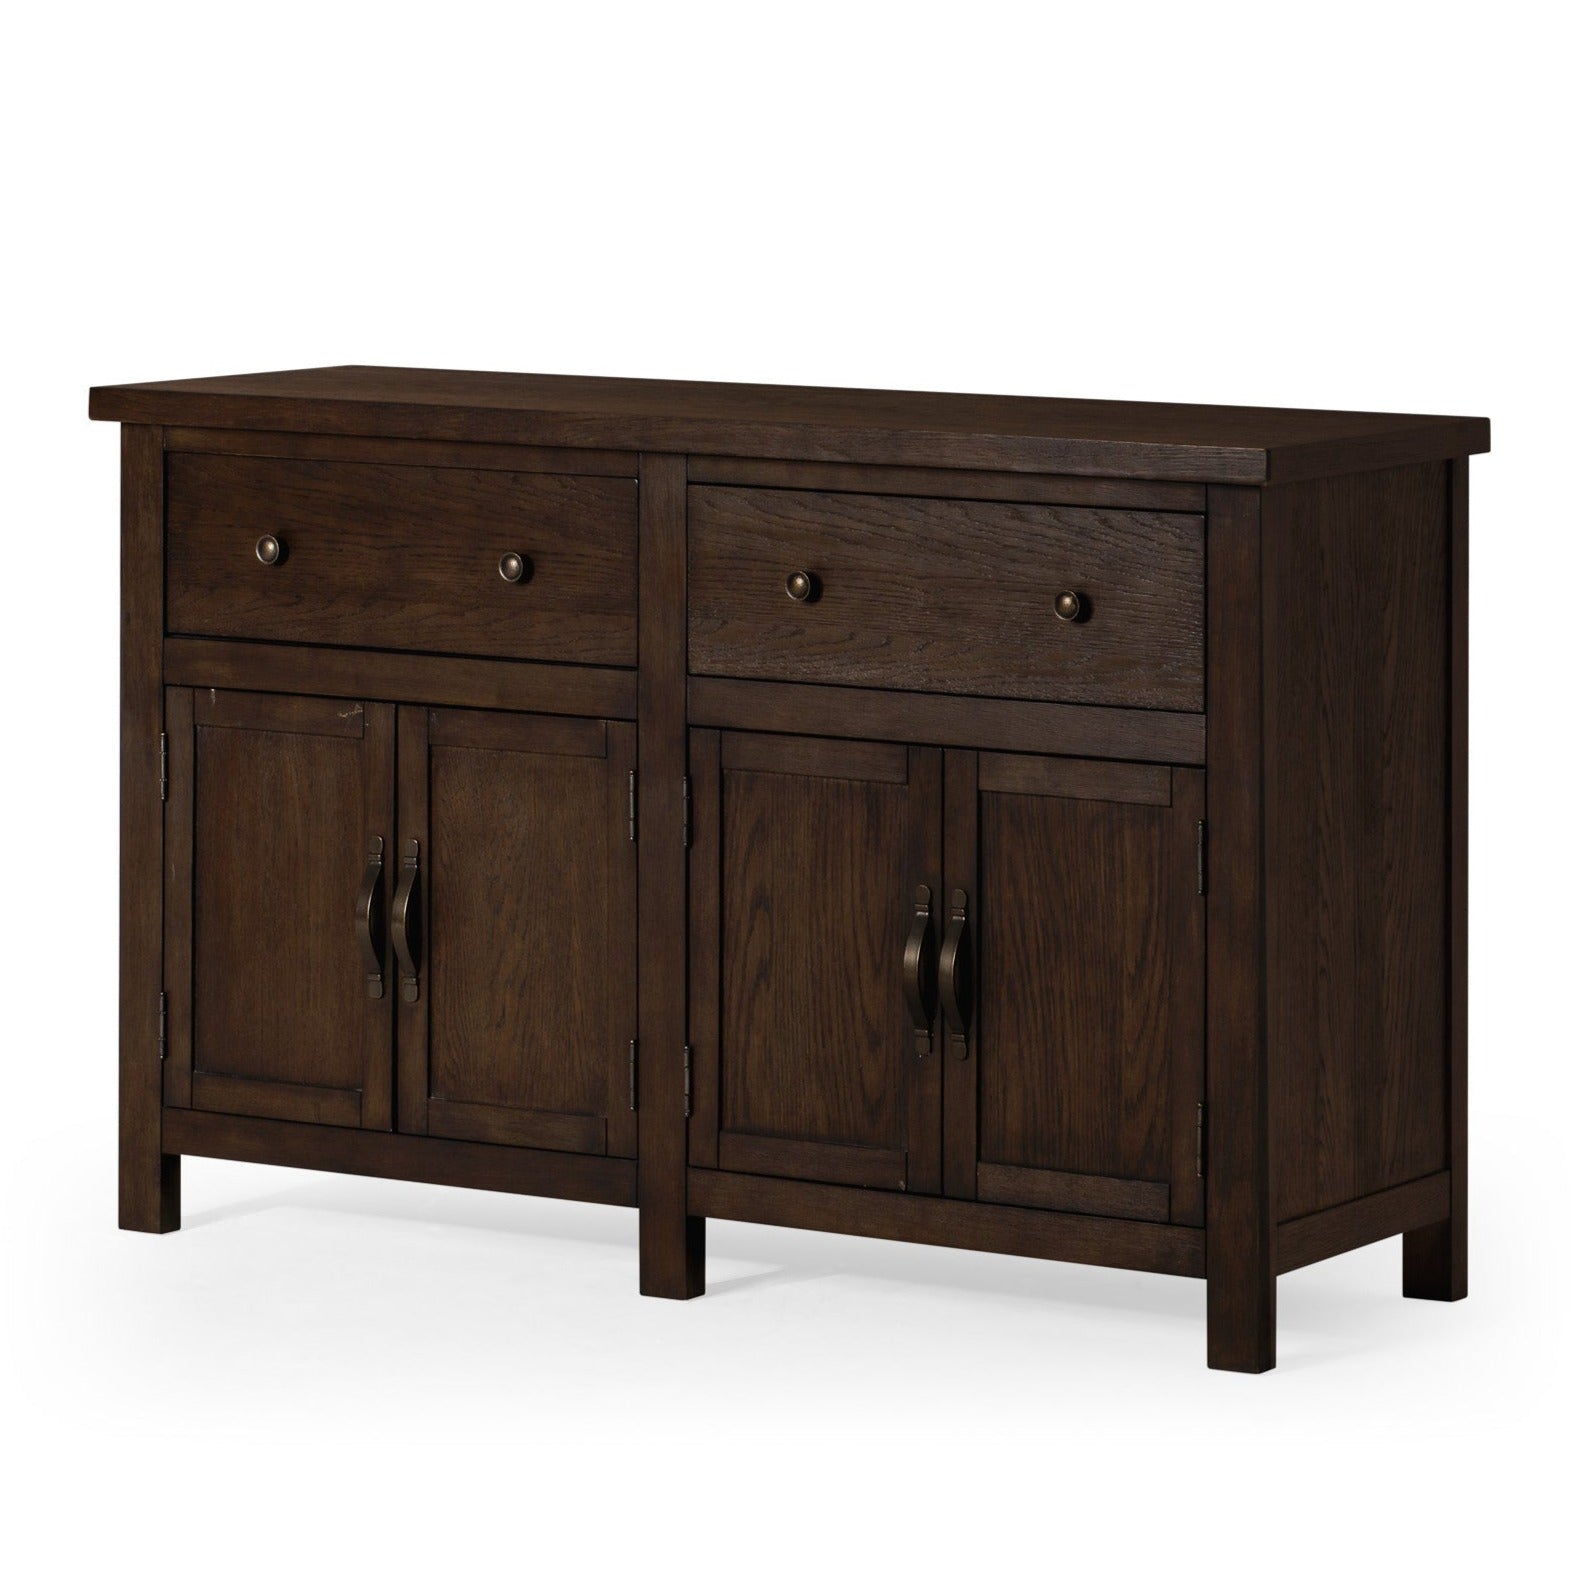 Felix Organic Wooden Sideboard in Weathered Brown Finish in Cabinets by Maven Lane